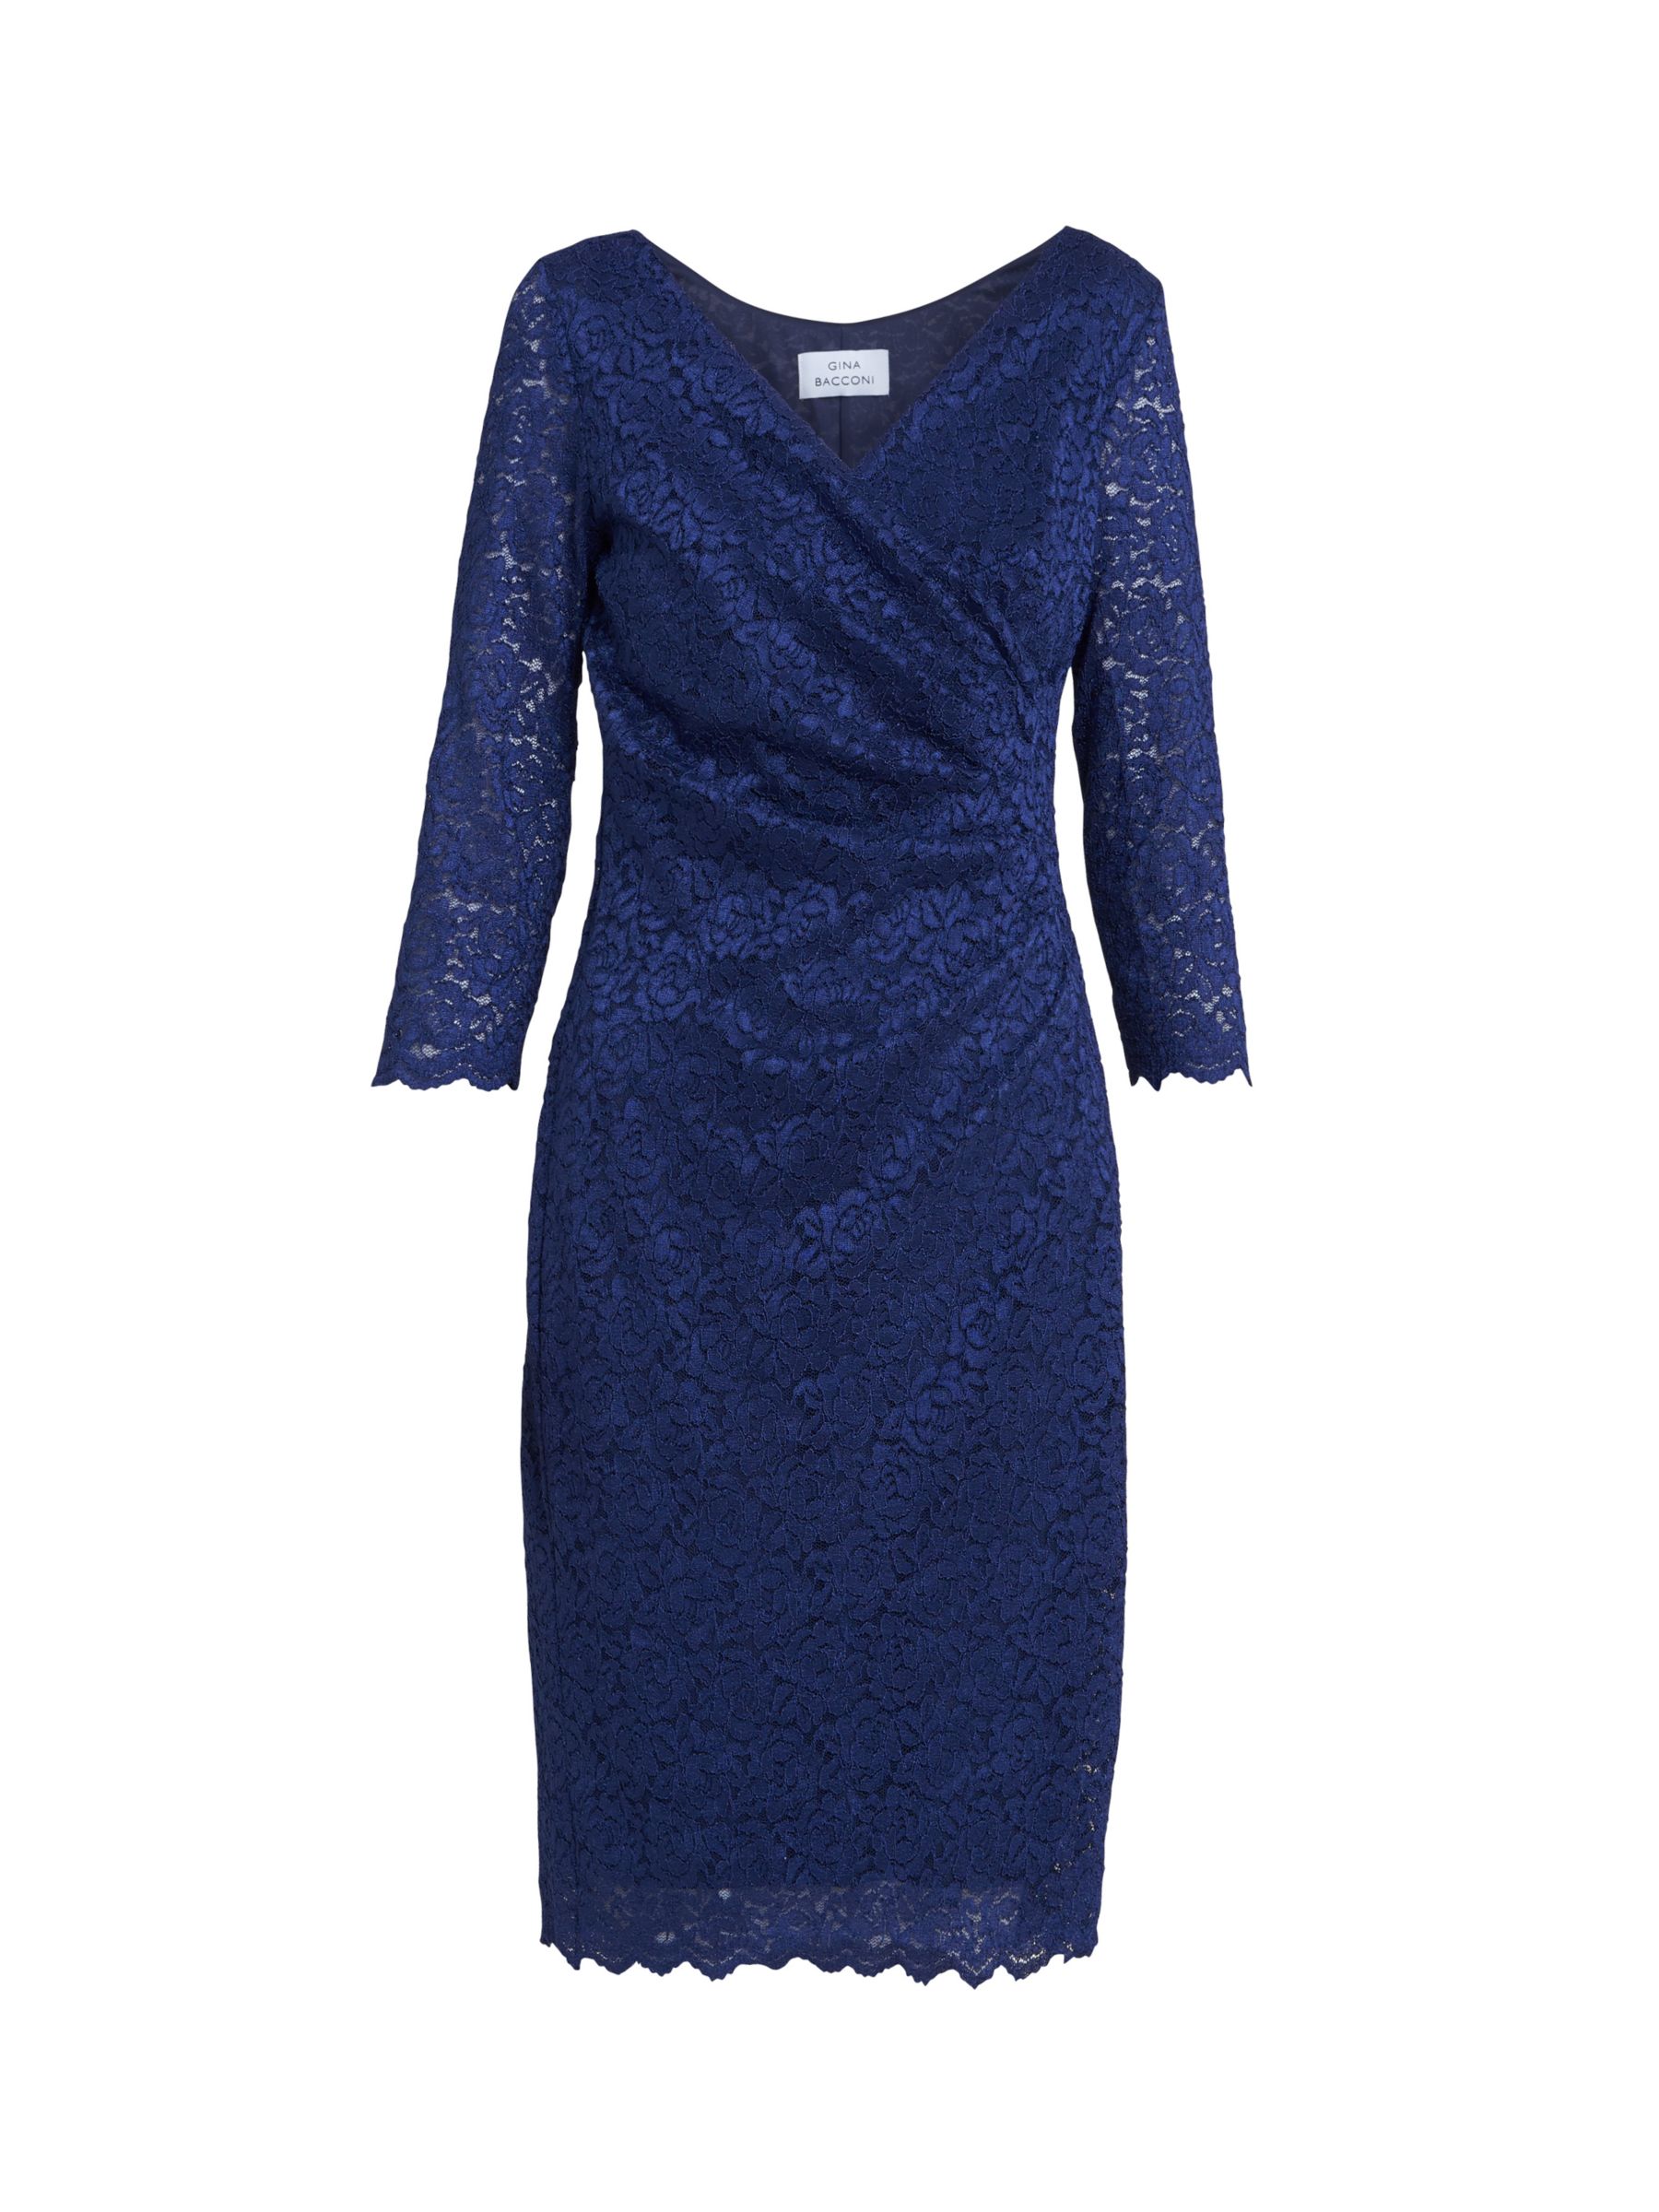 Buy Gina Bacconi Melody Lace Wrap Dress, Navy Online at johnlewis.com